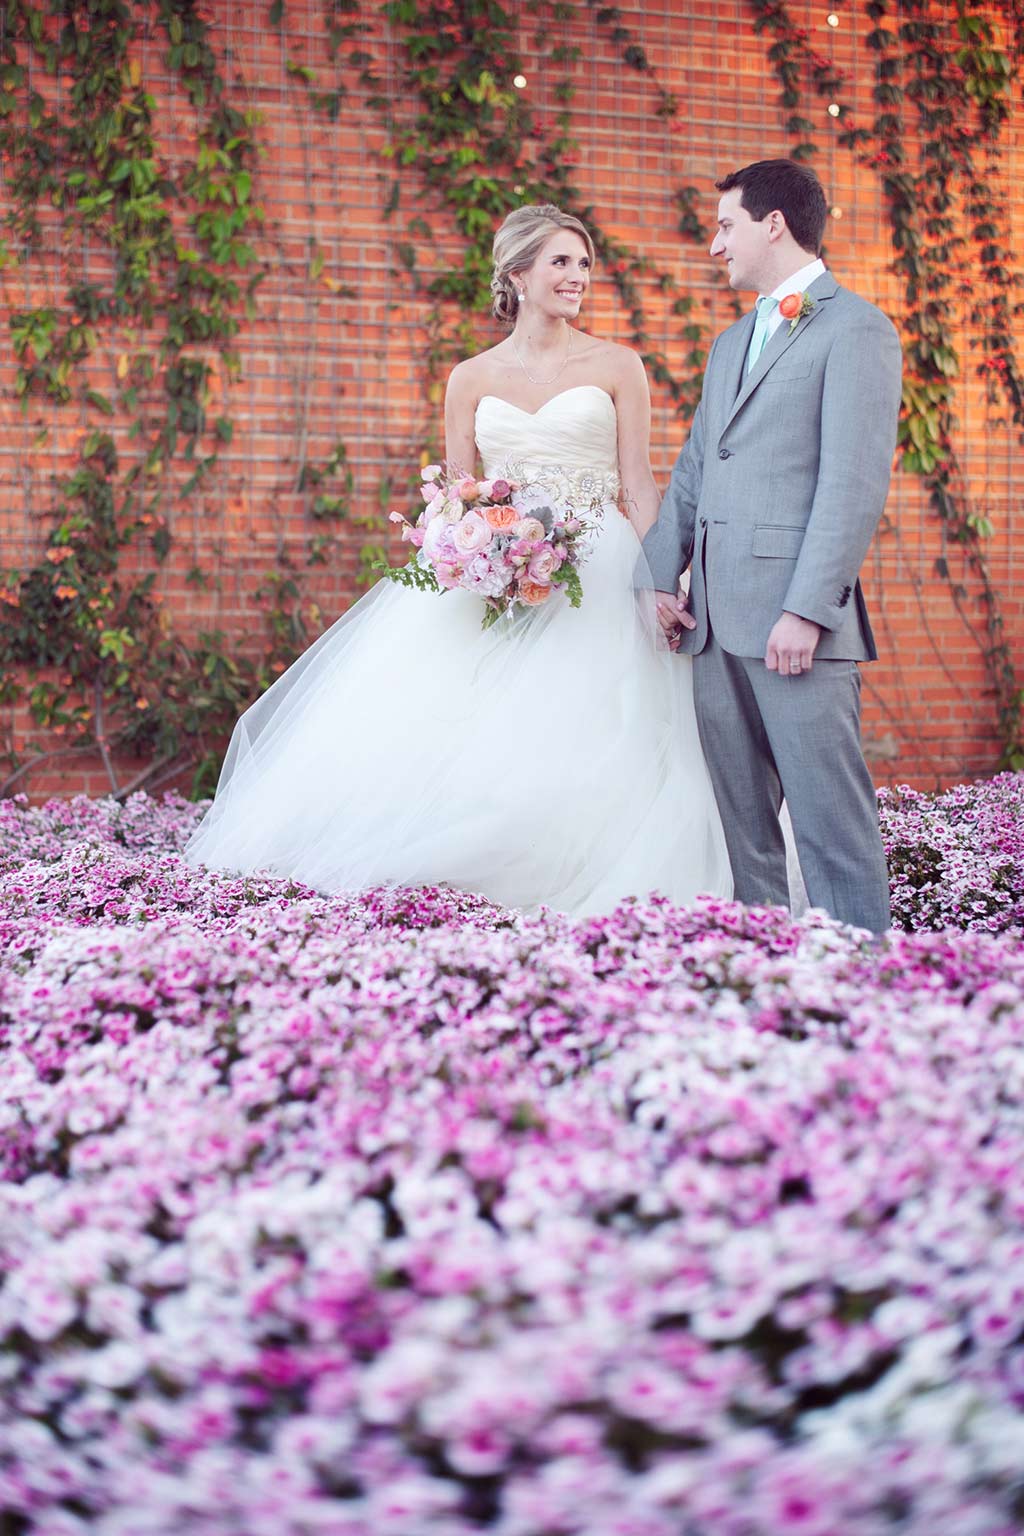 Bridge and groom portrait over purple flower field at Hickory Street Annex in Dallas